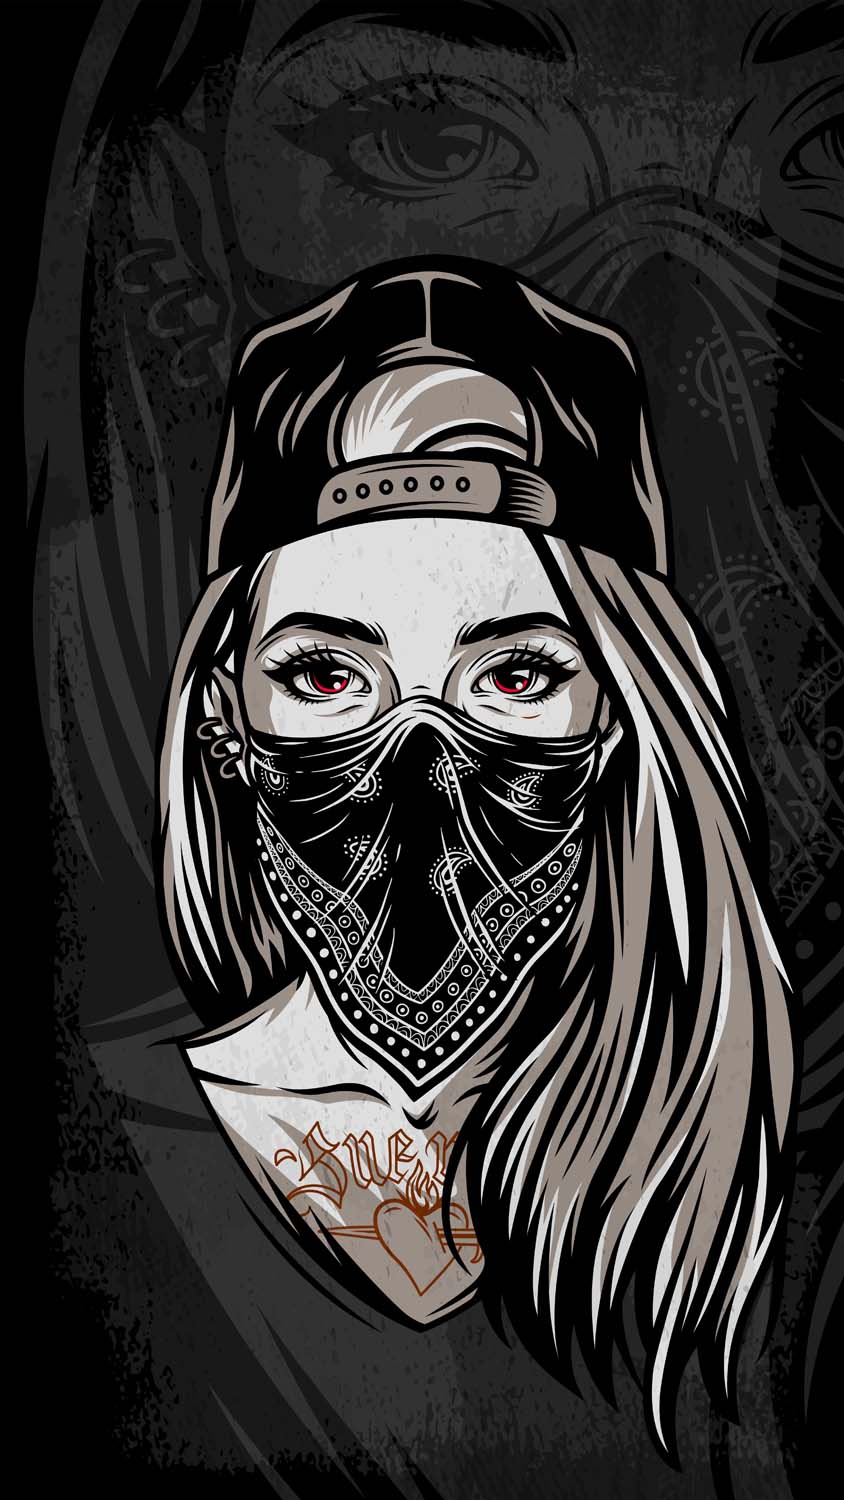 Tattoo Girl IPhone Wallpaper HD - IPhone Wallpapers : iPhone Wallpapers